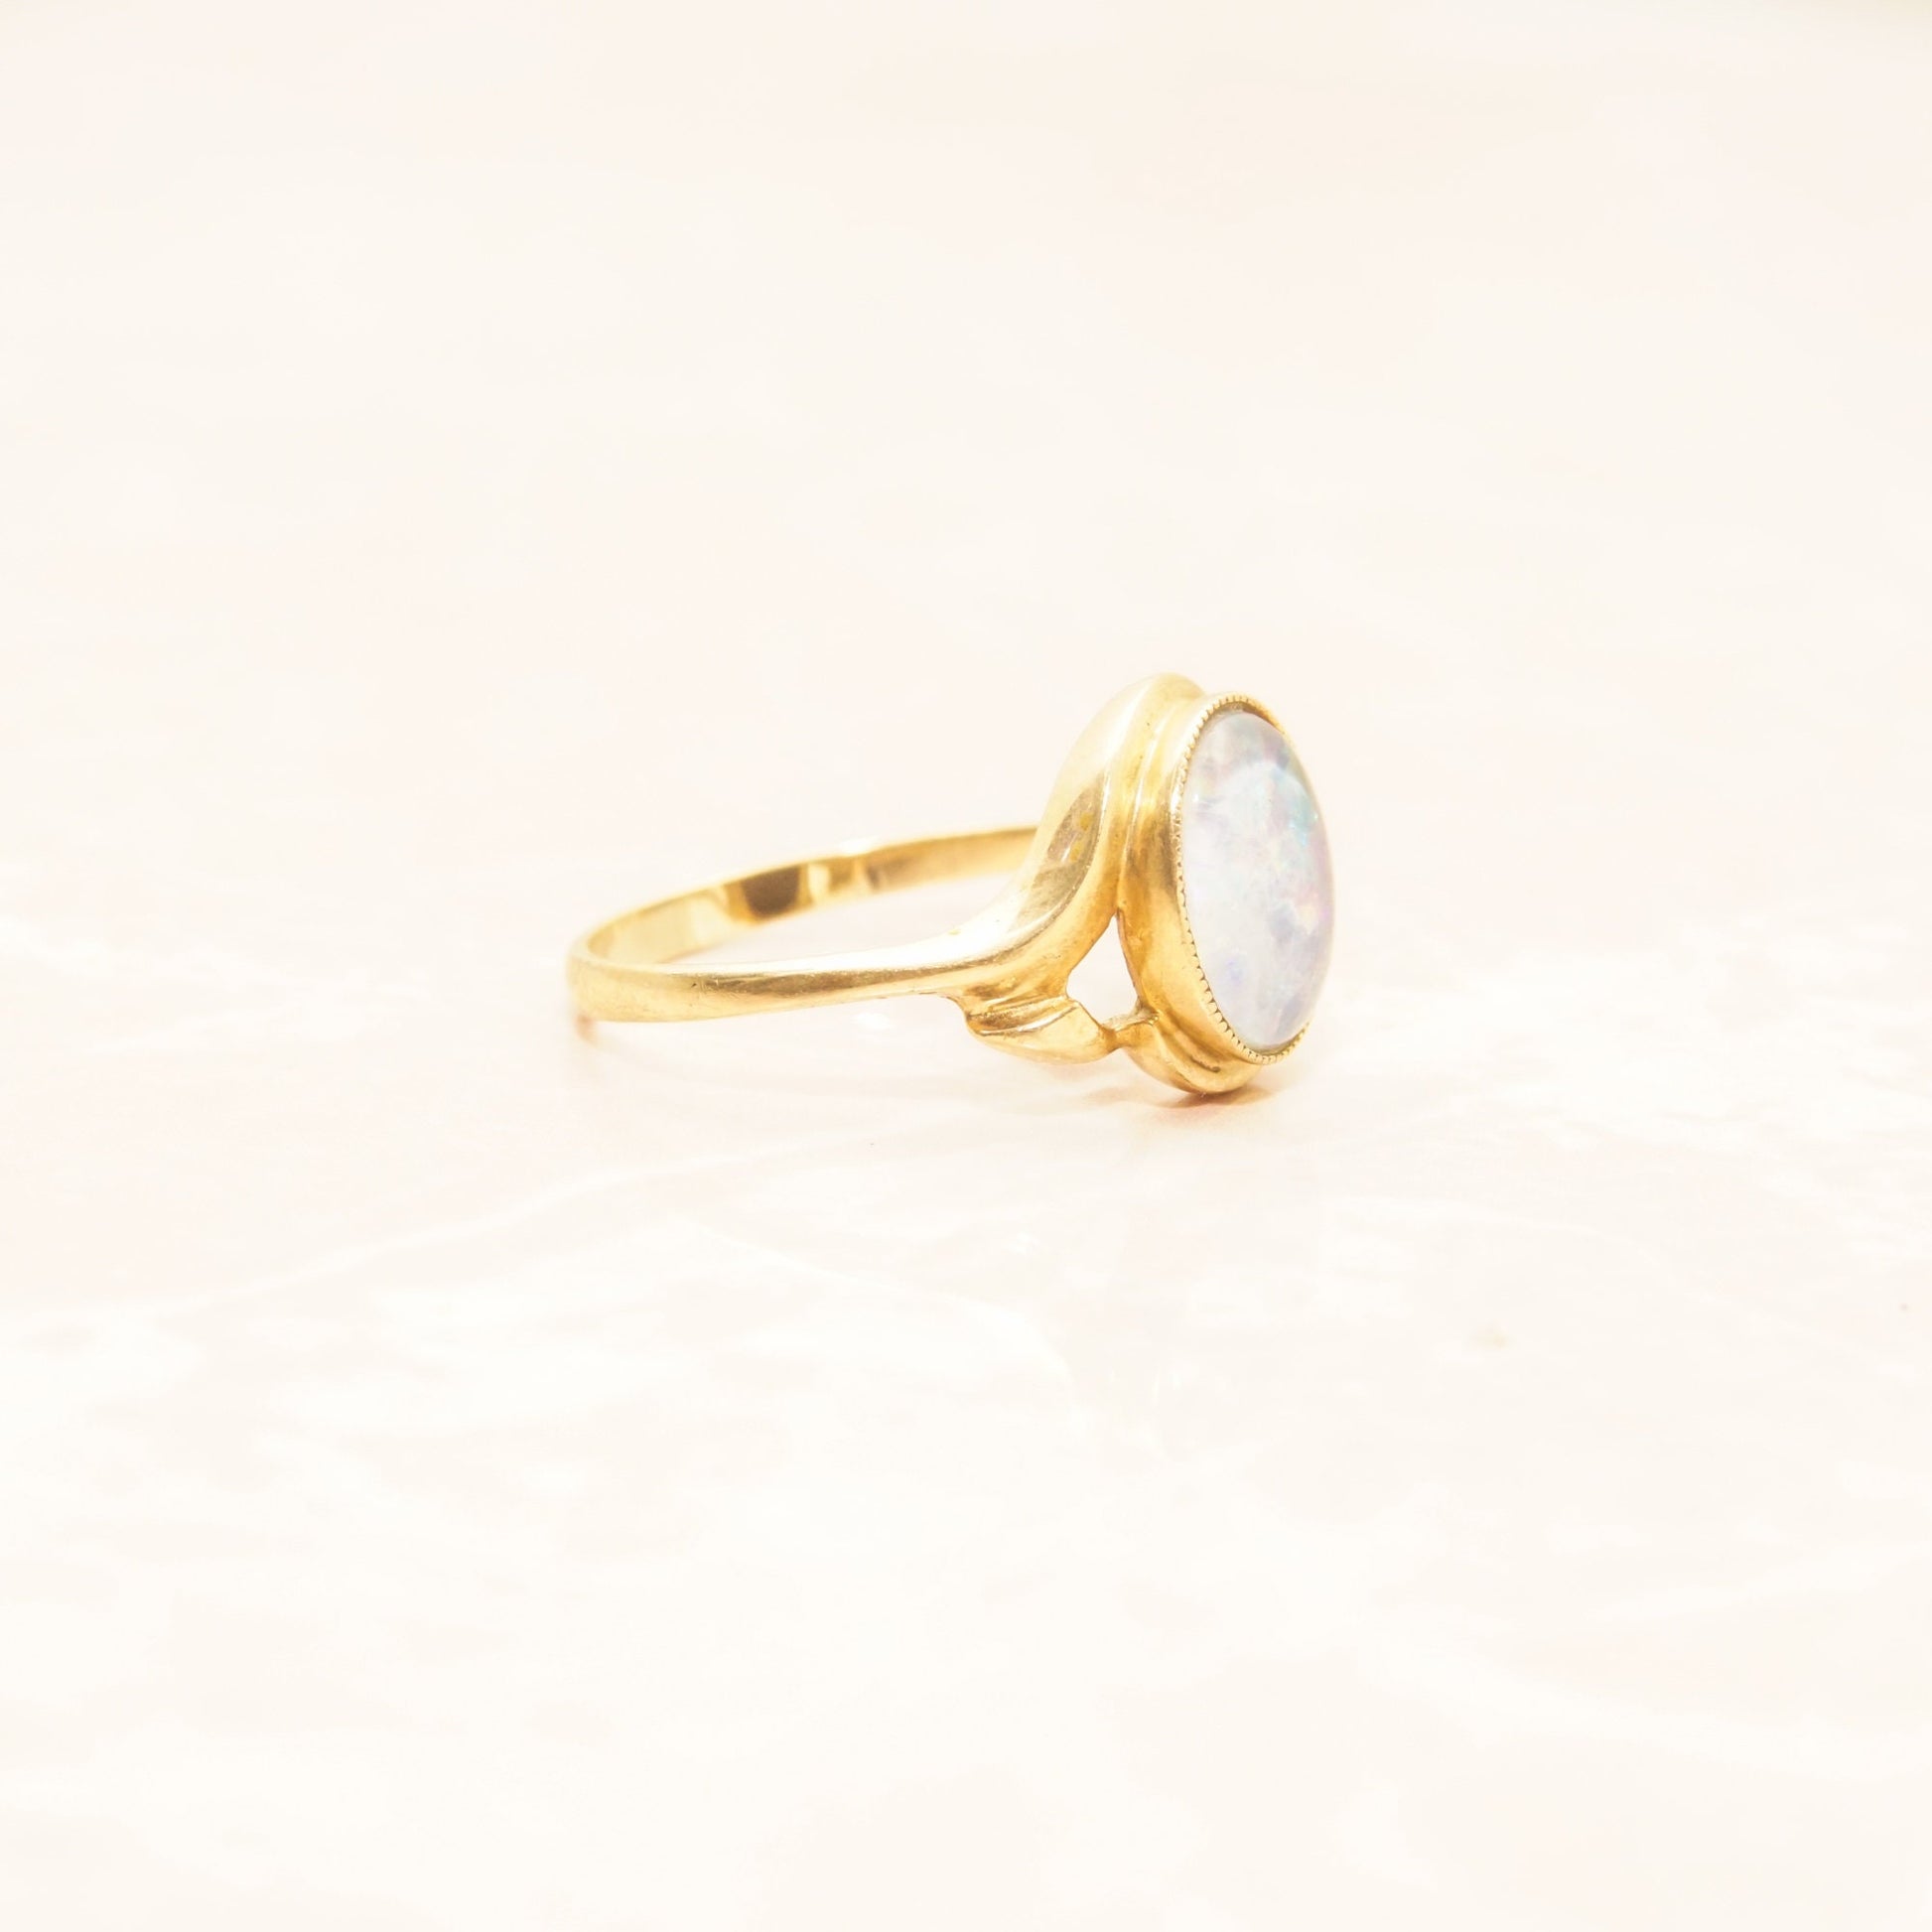 10K yellow gold opal triplet cocktail ring, estate jewelry, size 8 1/4 US